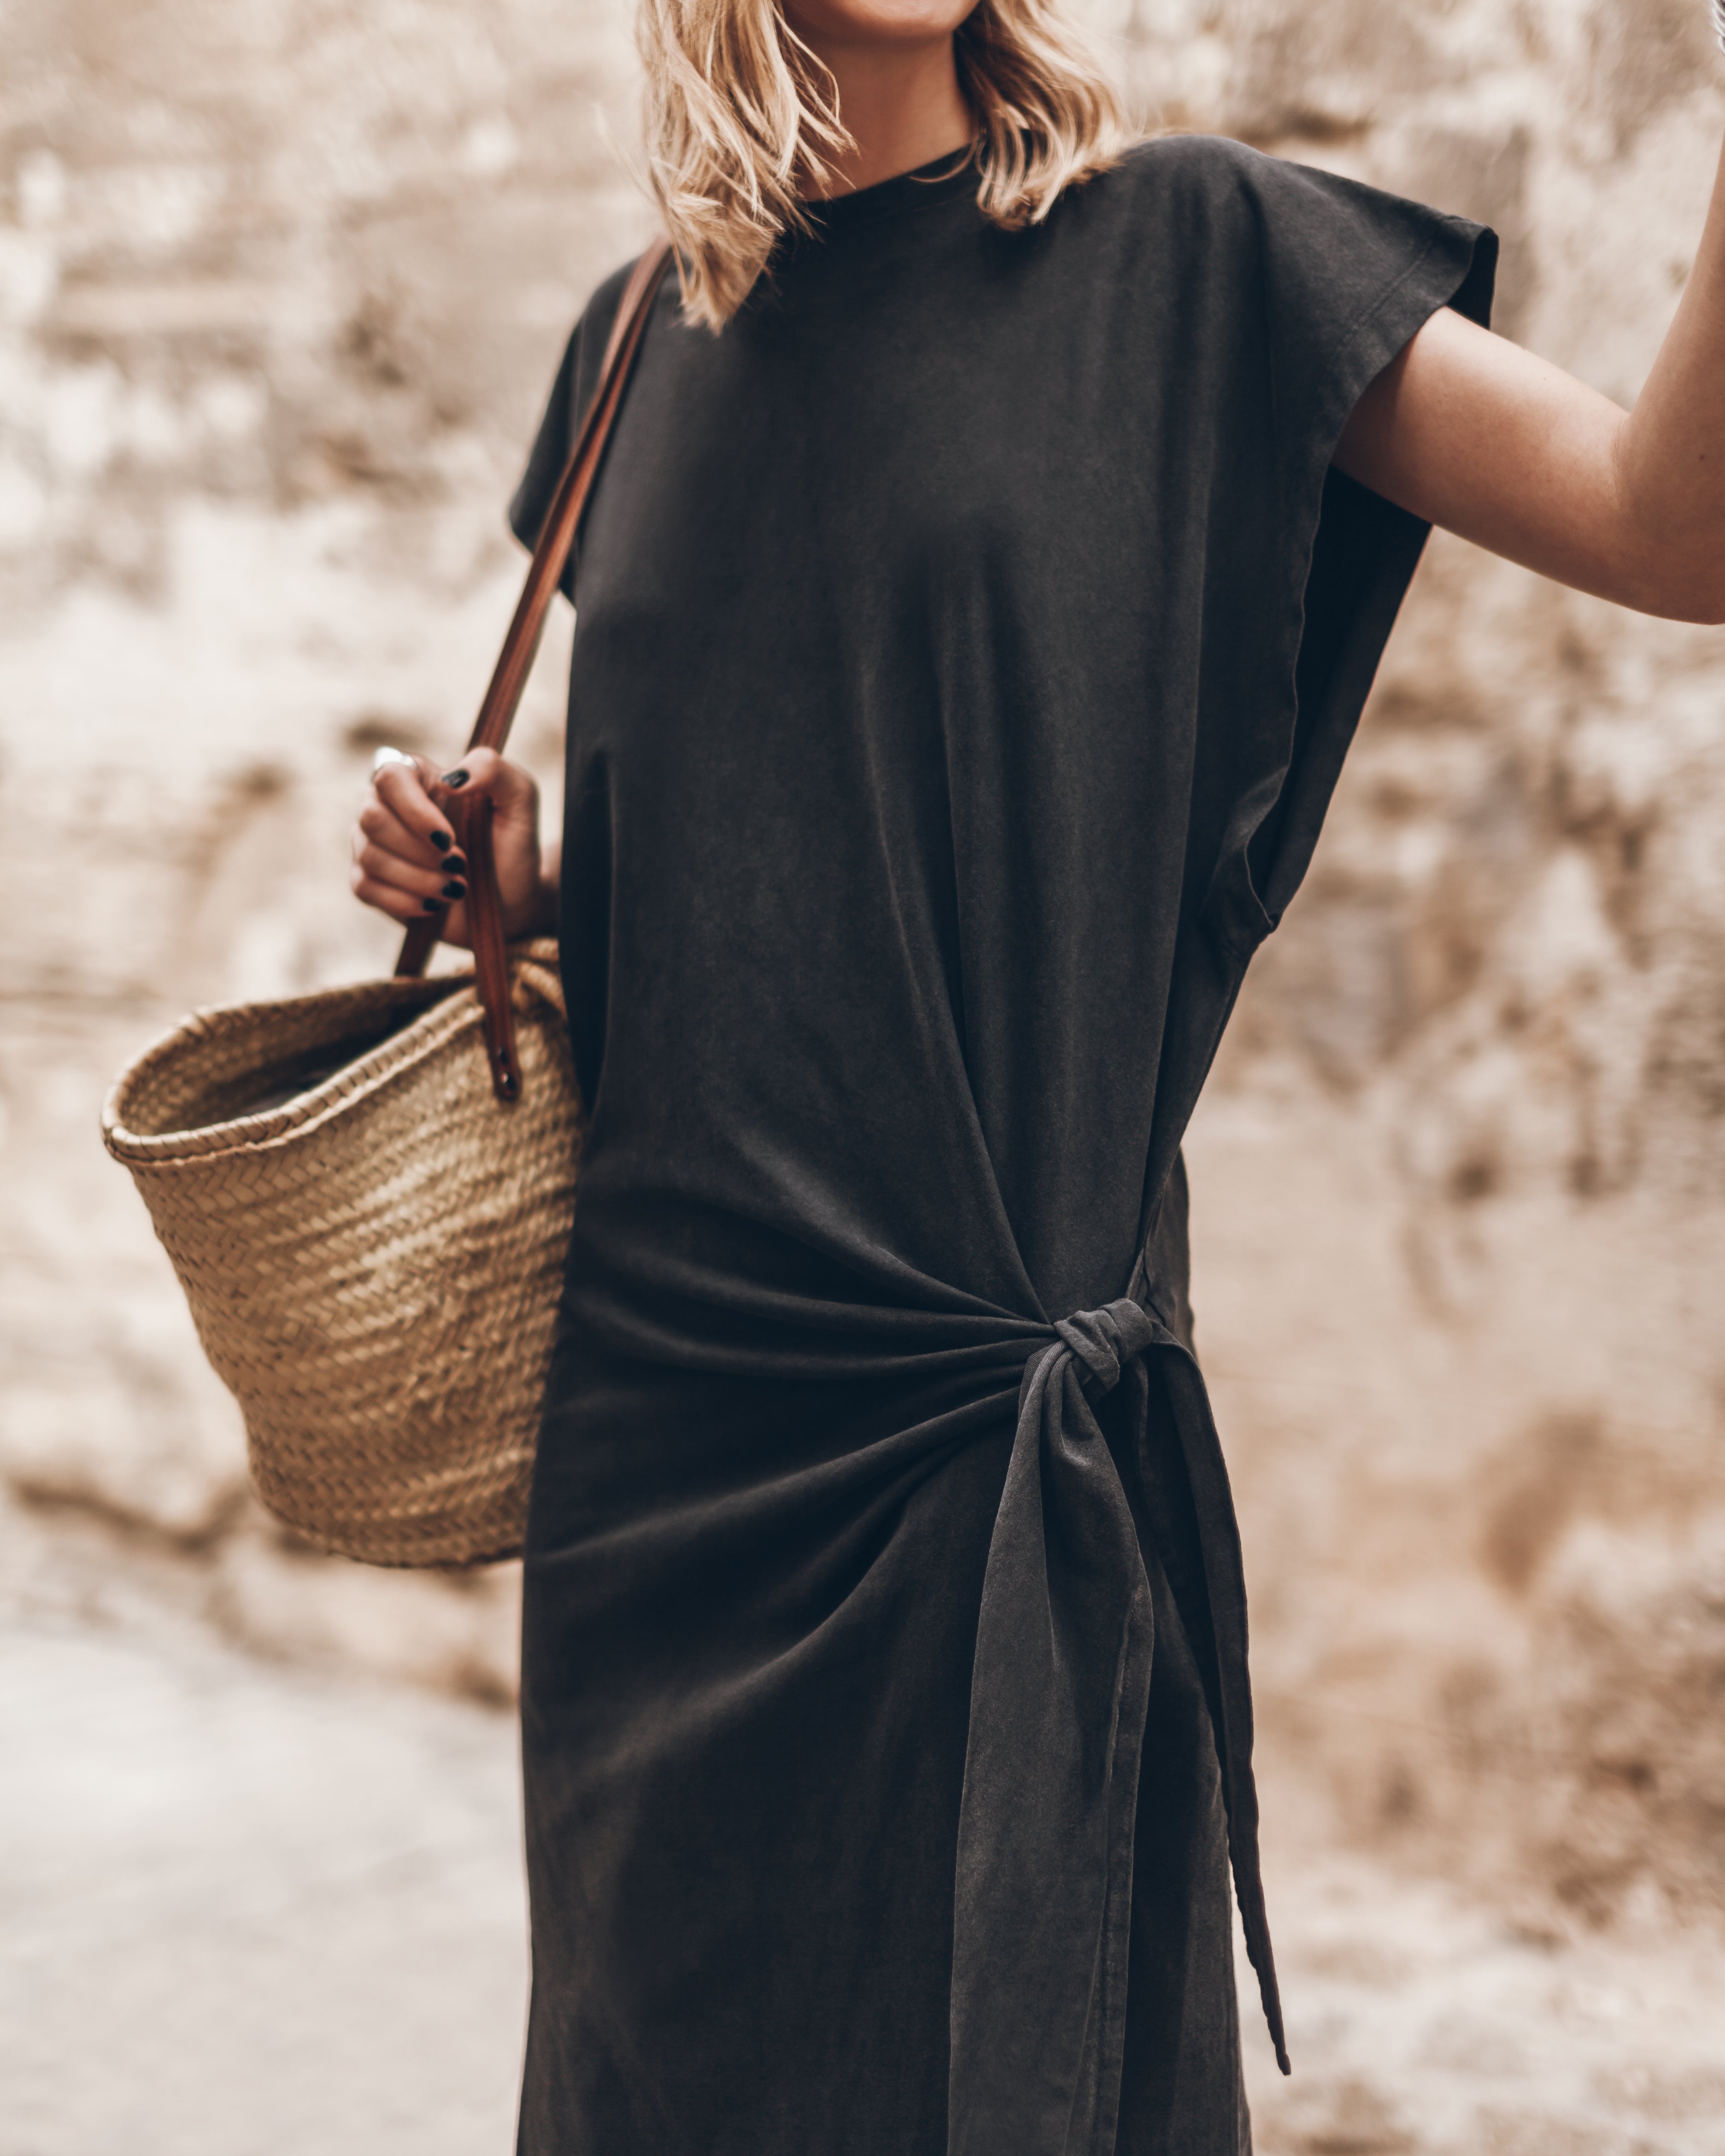 The Dark Long Knotted Batwing Dress